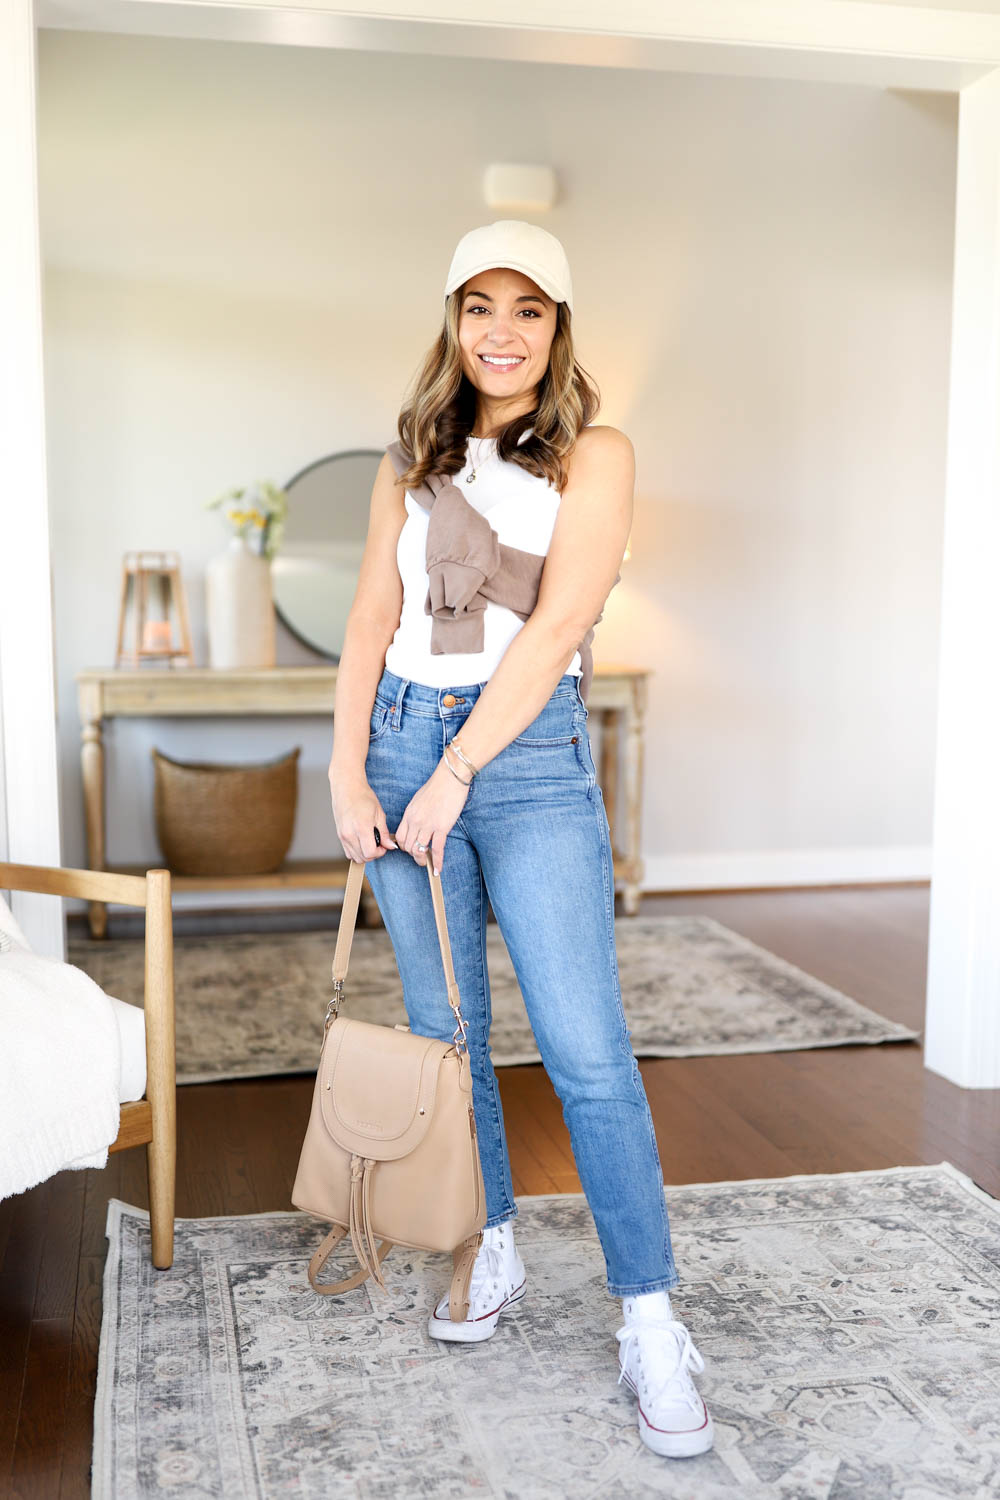 Spring Sneakers Outfits - Pumps & Push Ups